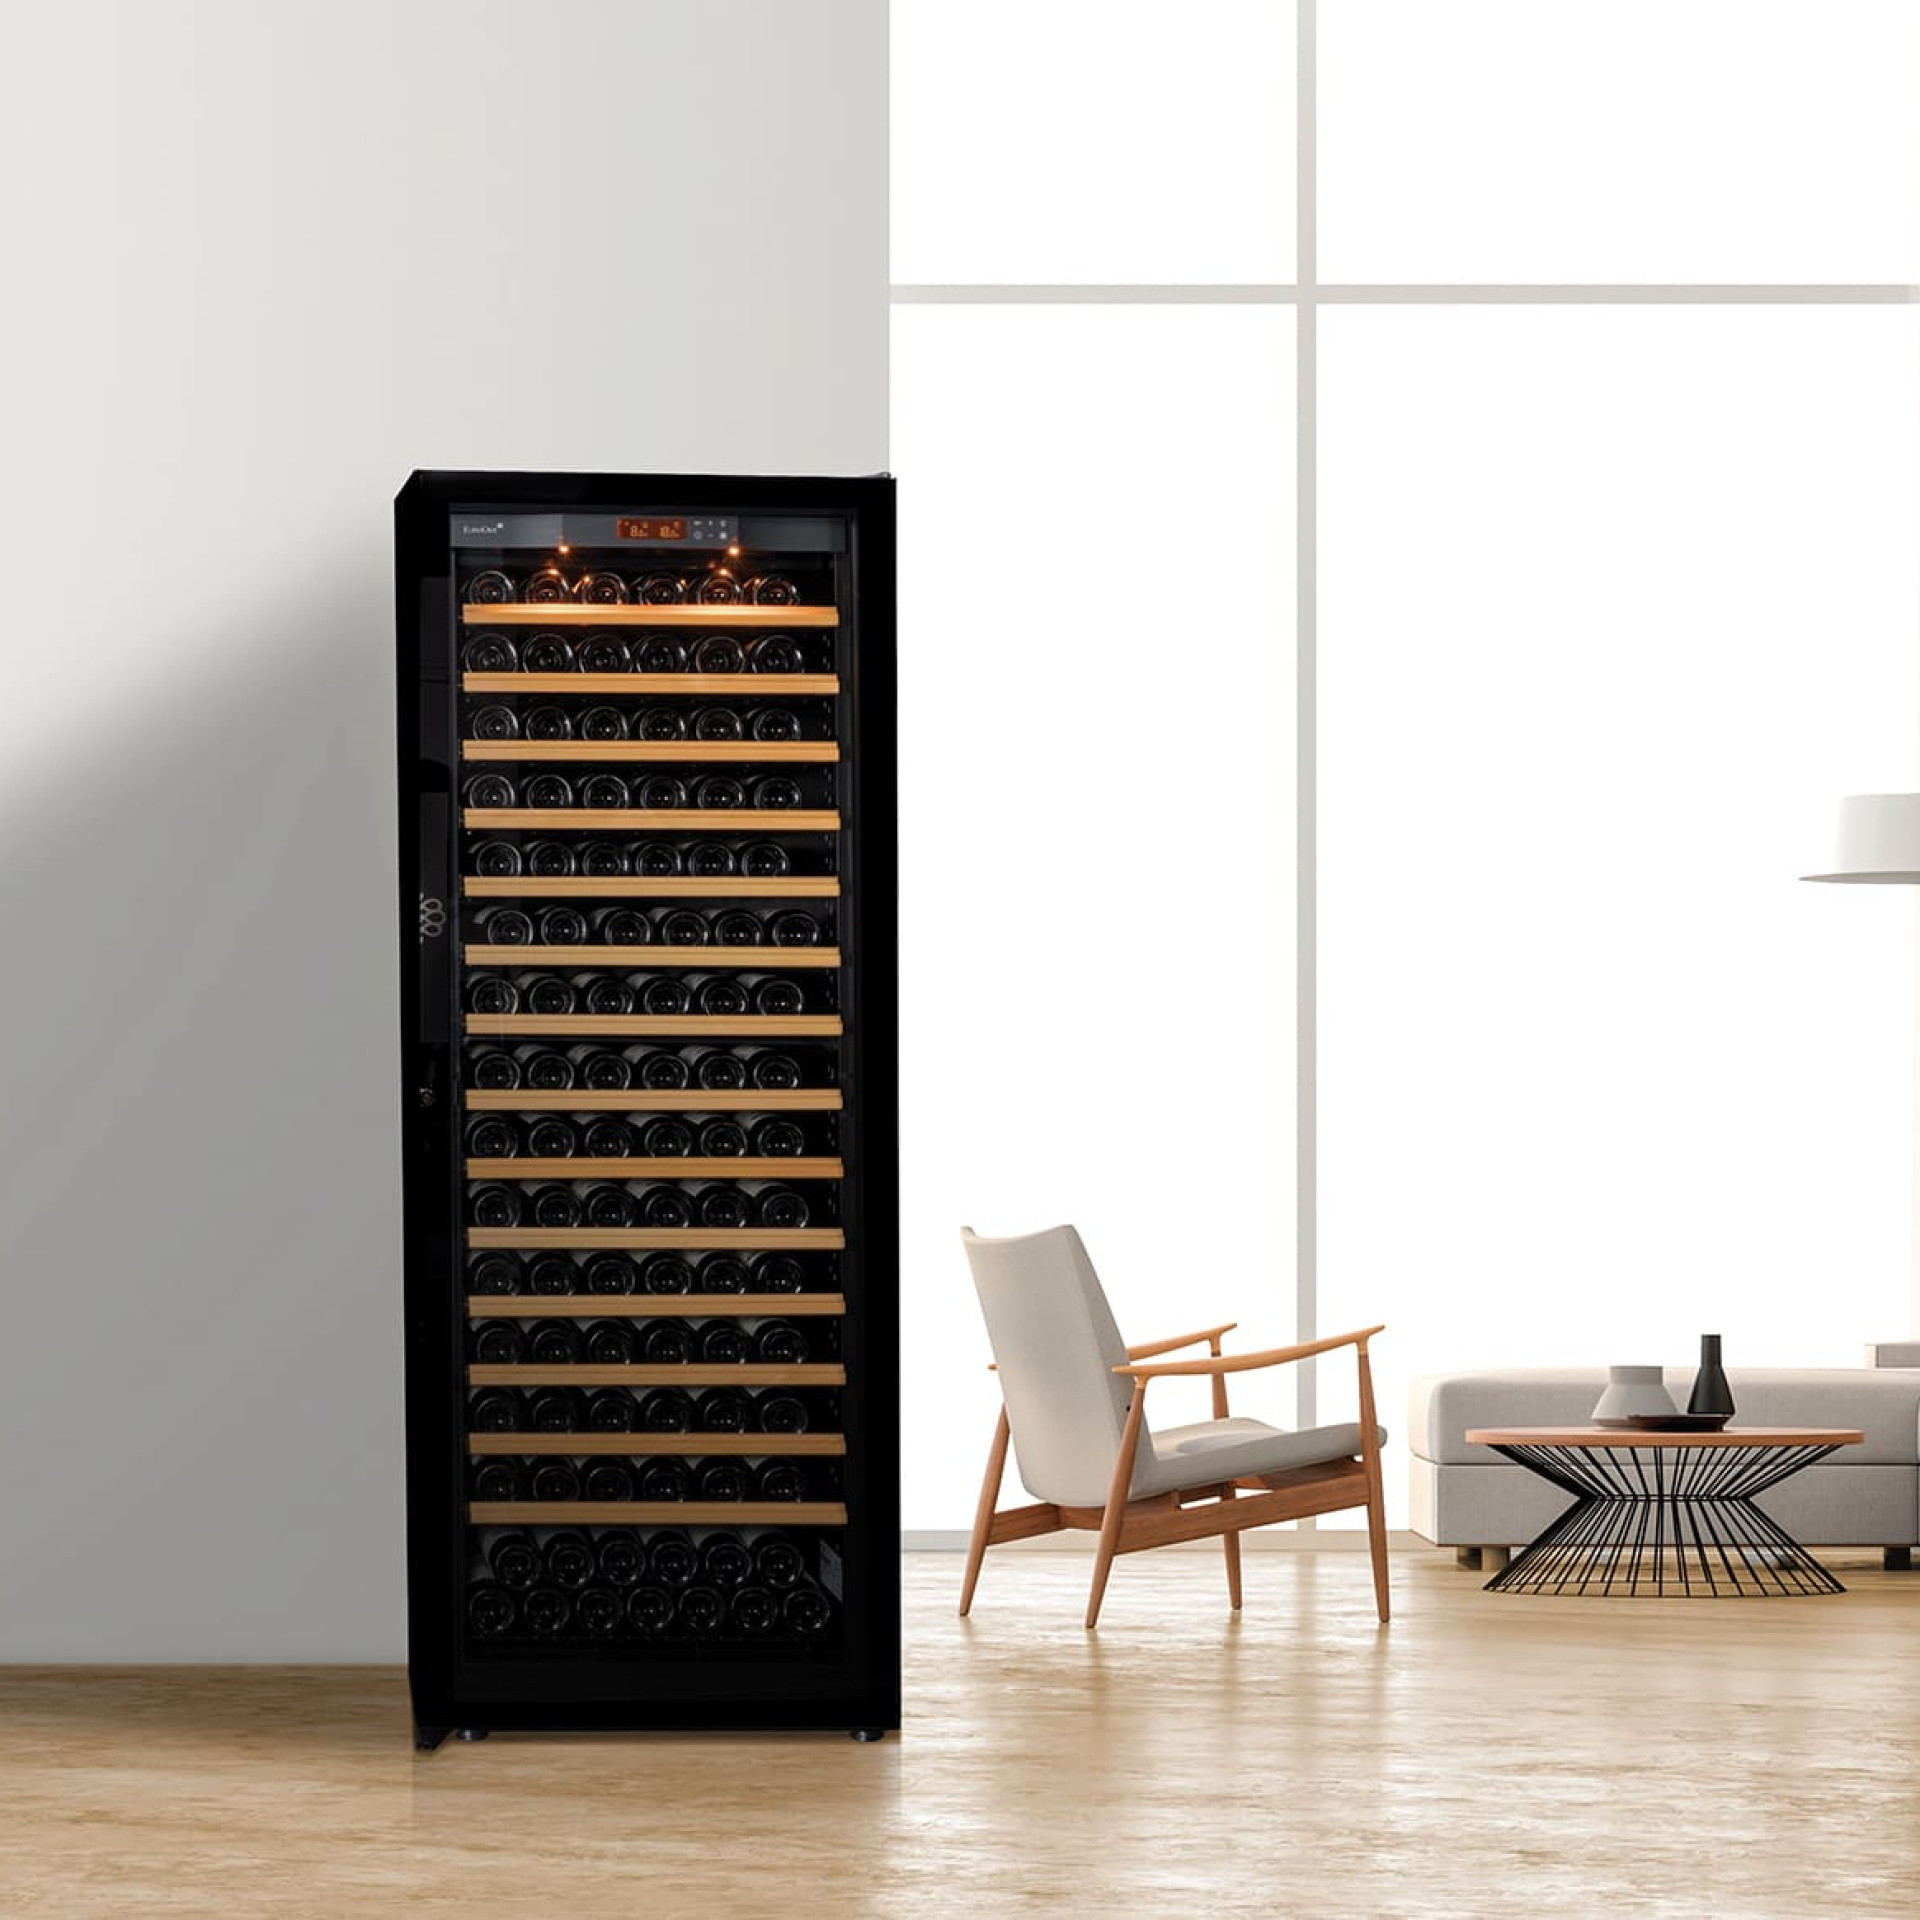 Multi-temperature wine cooler - a temperature gradient allows the temperature to be staggered from cold to hot to get as close as possible to the serving temperature of each wine.